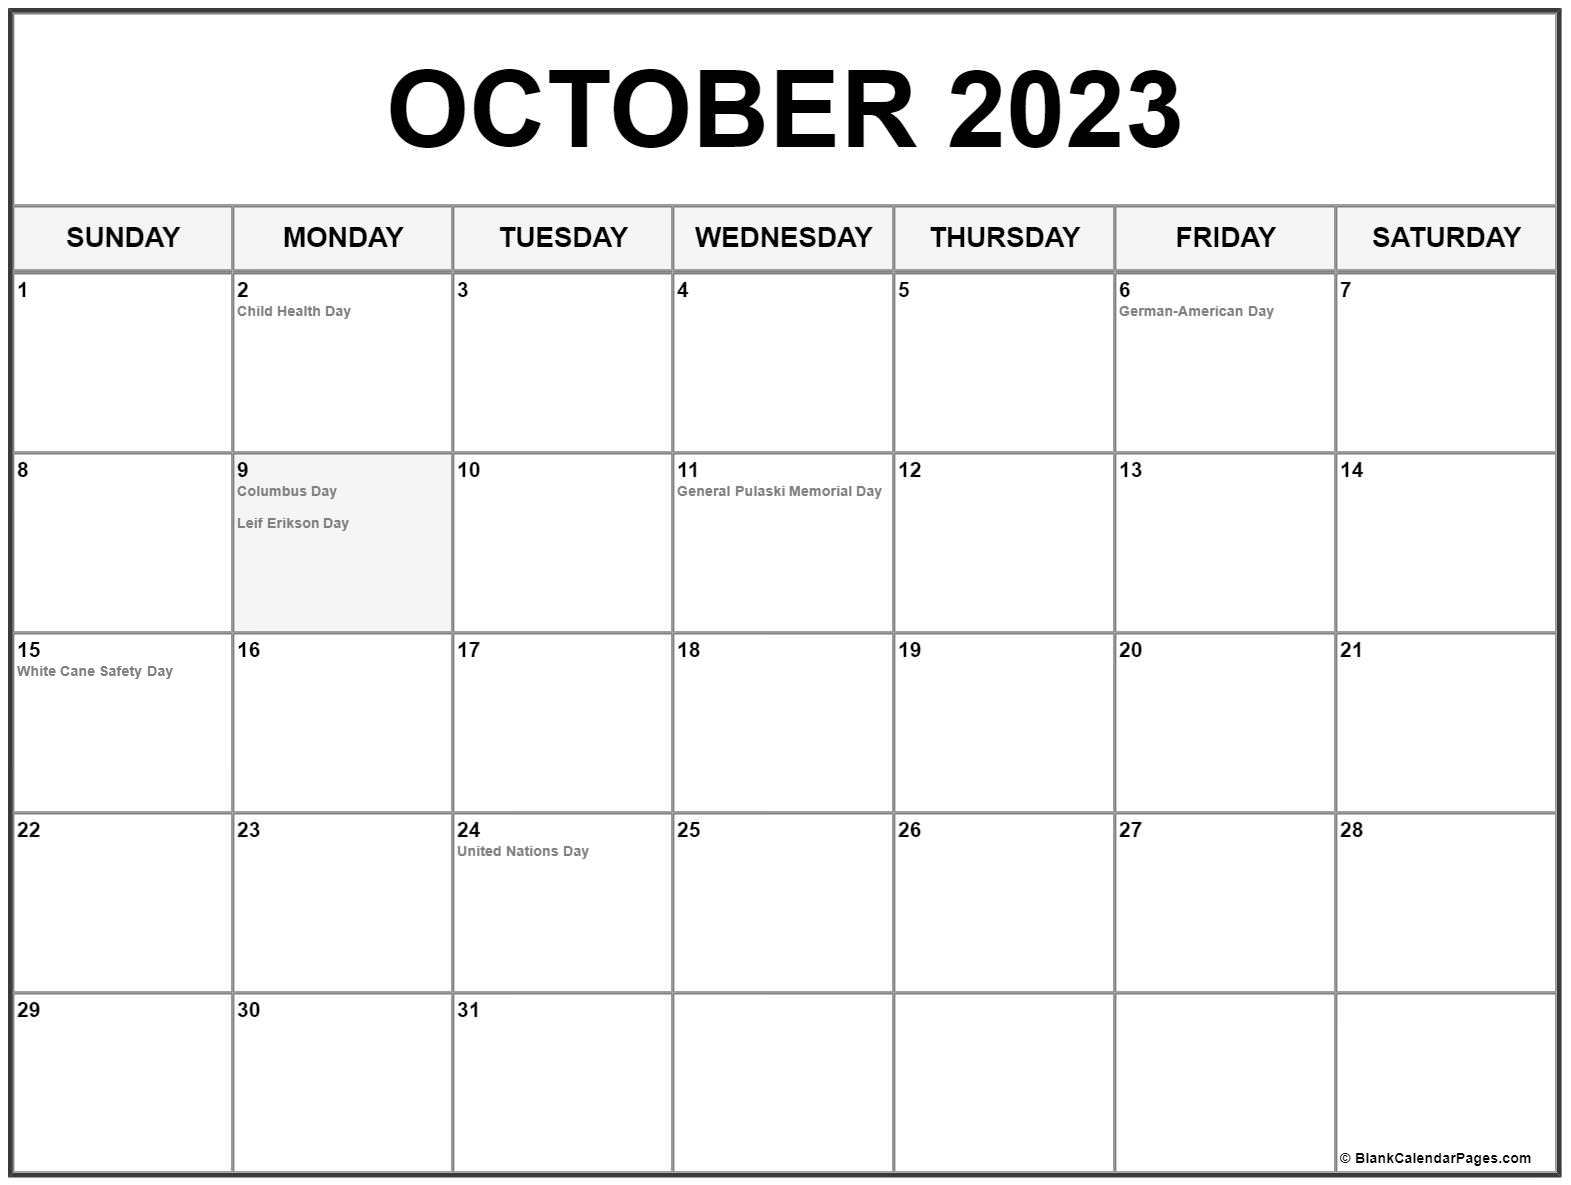 october events in houston 2023